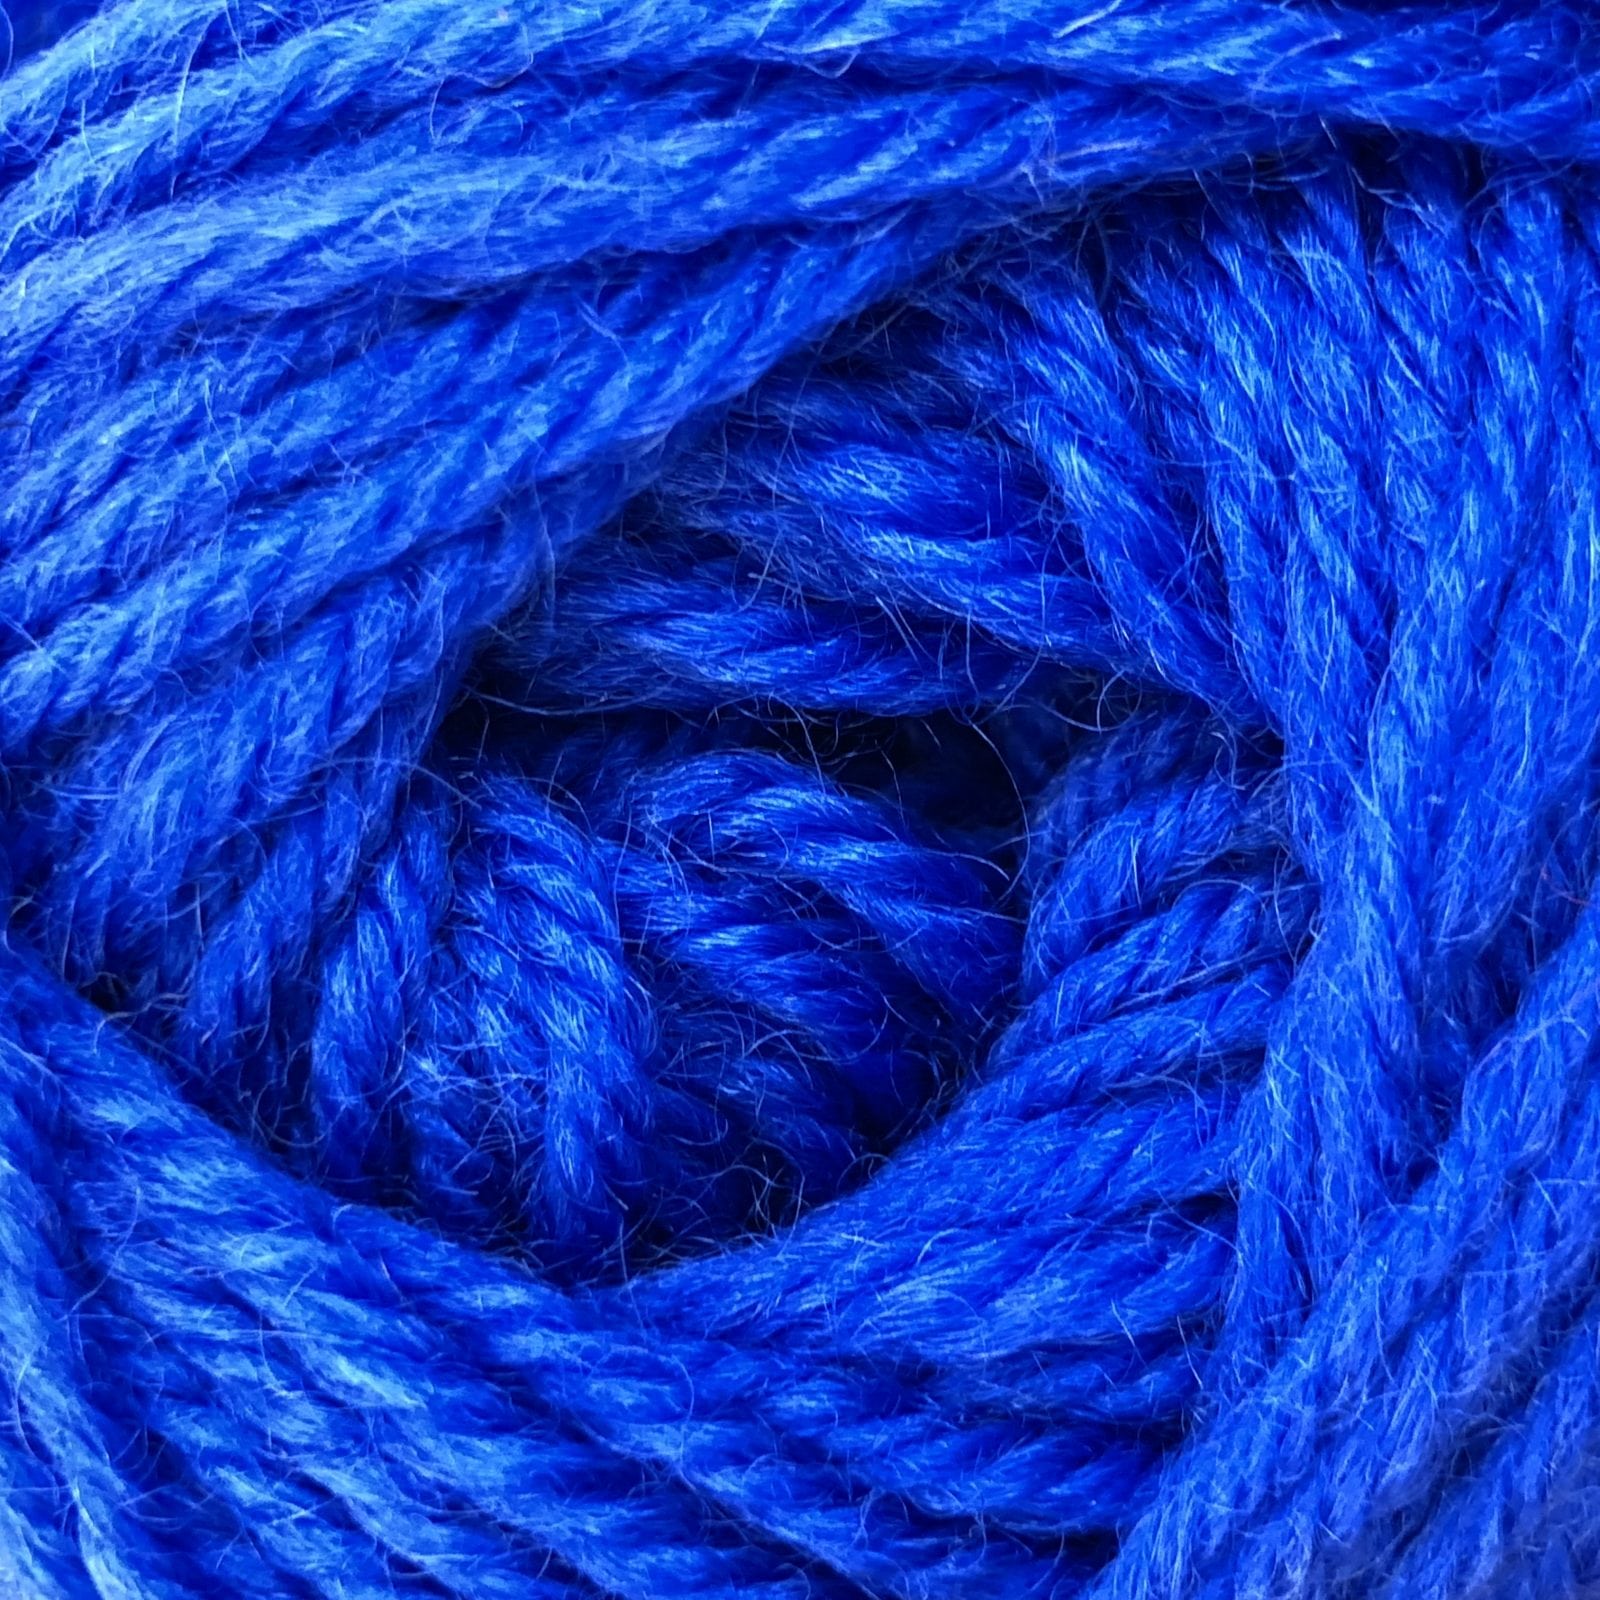 Countrywide Windsor 100% New Zealand wool yarn 8ply 8 ply double knit dk Royal Blue shade 26